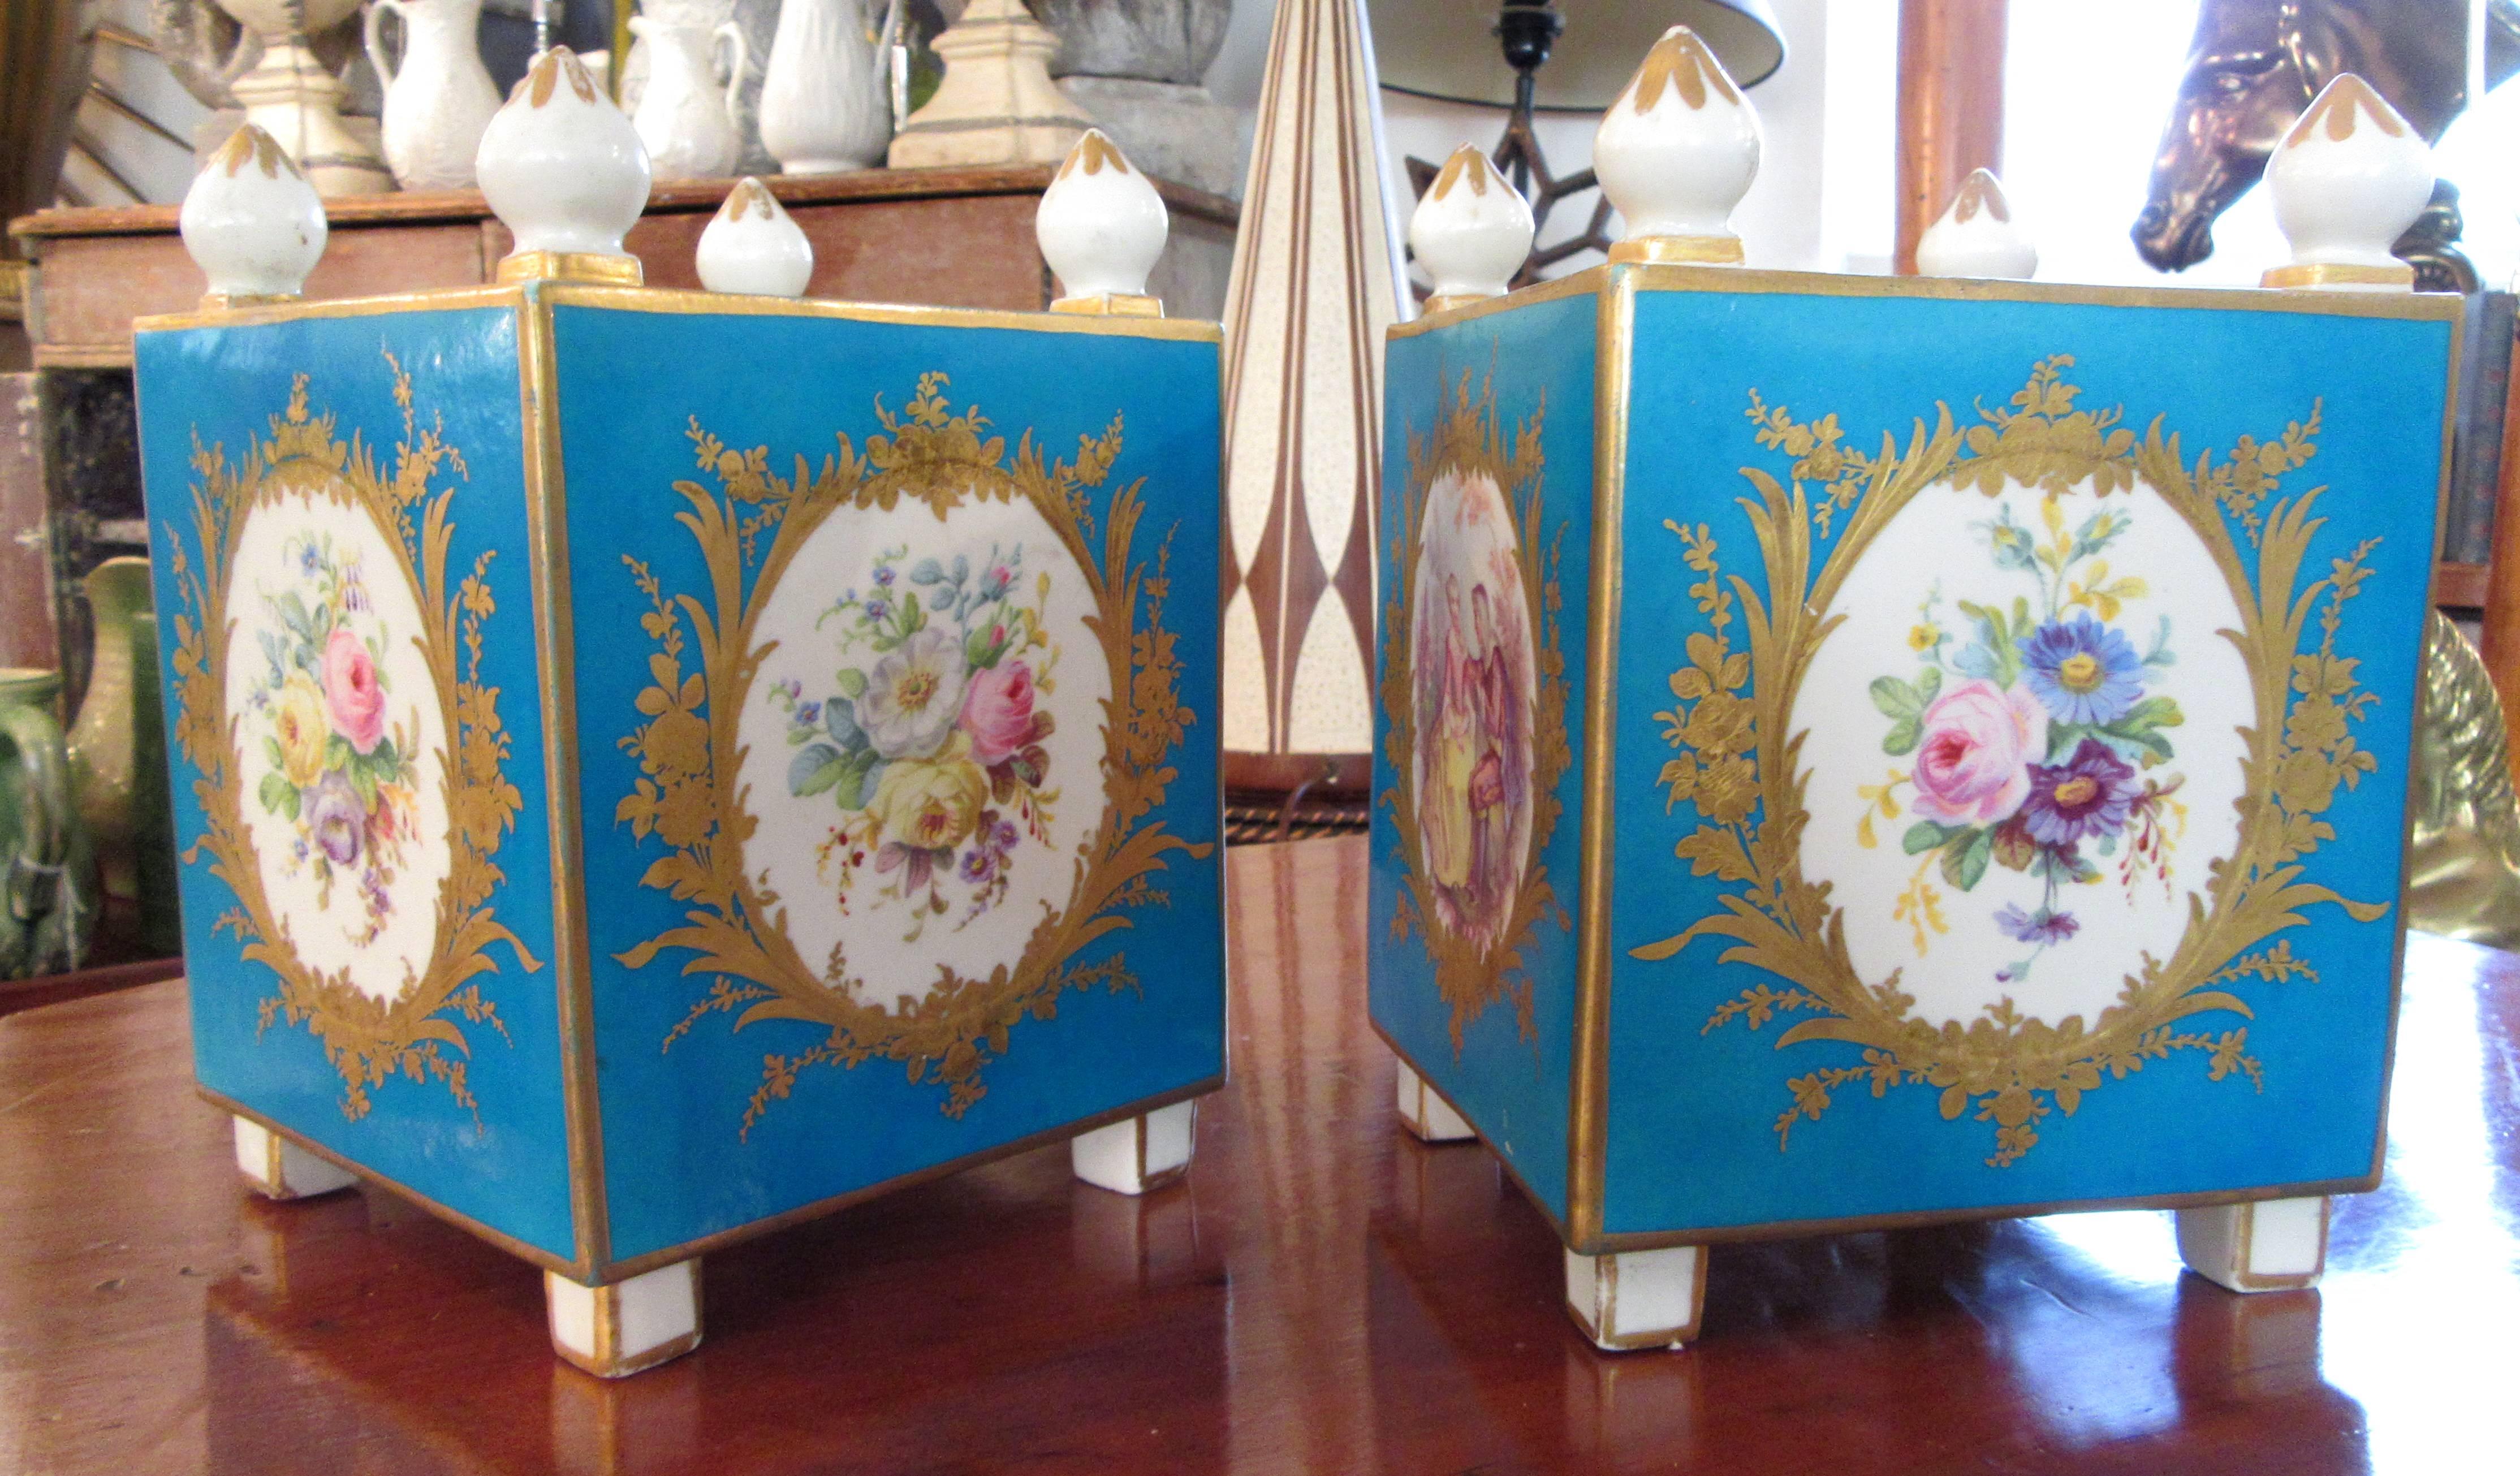 A pair of early Sevres (Vincennes) porcelain orange pots with the traditional blue turquoise background. Three sides are medallions of flowers while the Fourth is a romantic scene. All are surrounded by gilt foliage.